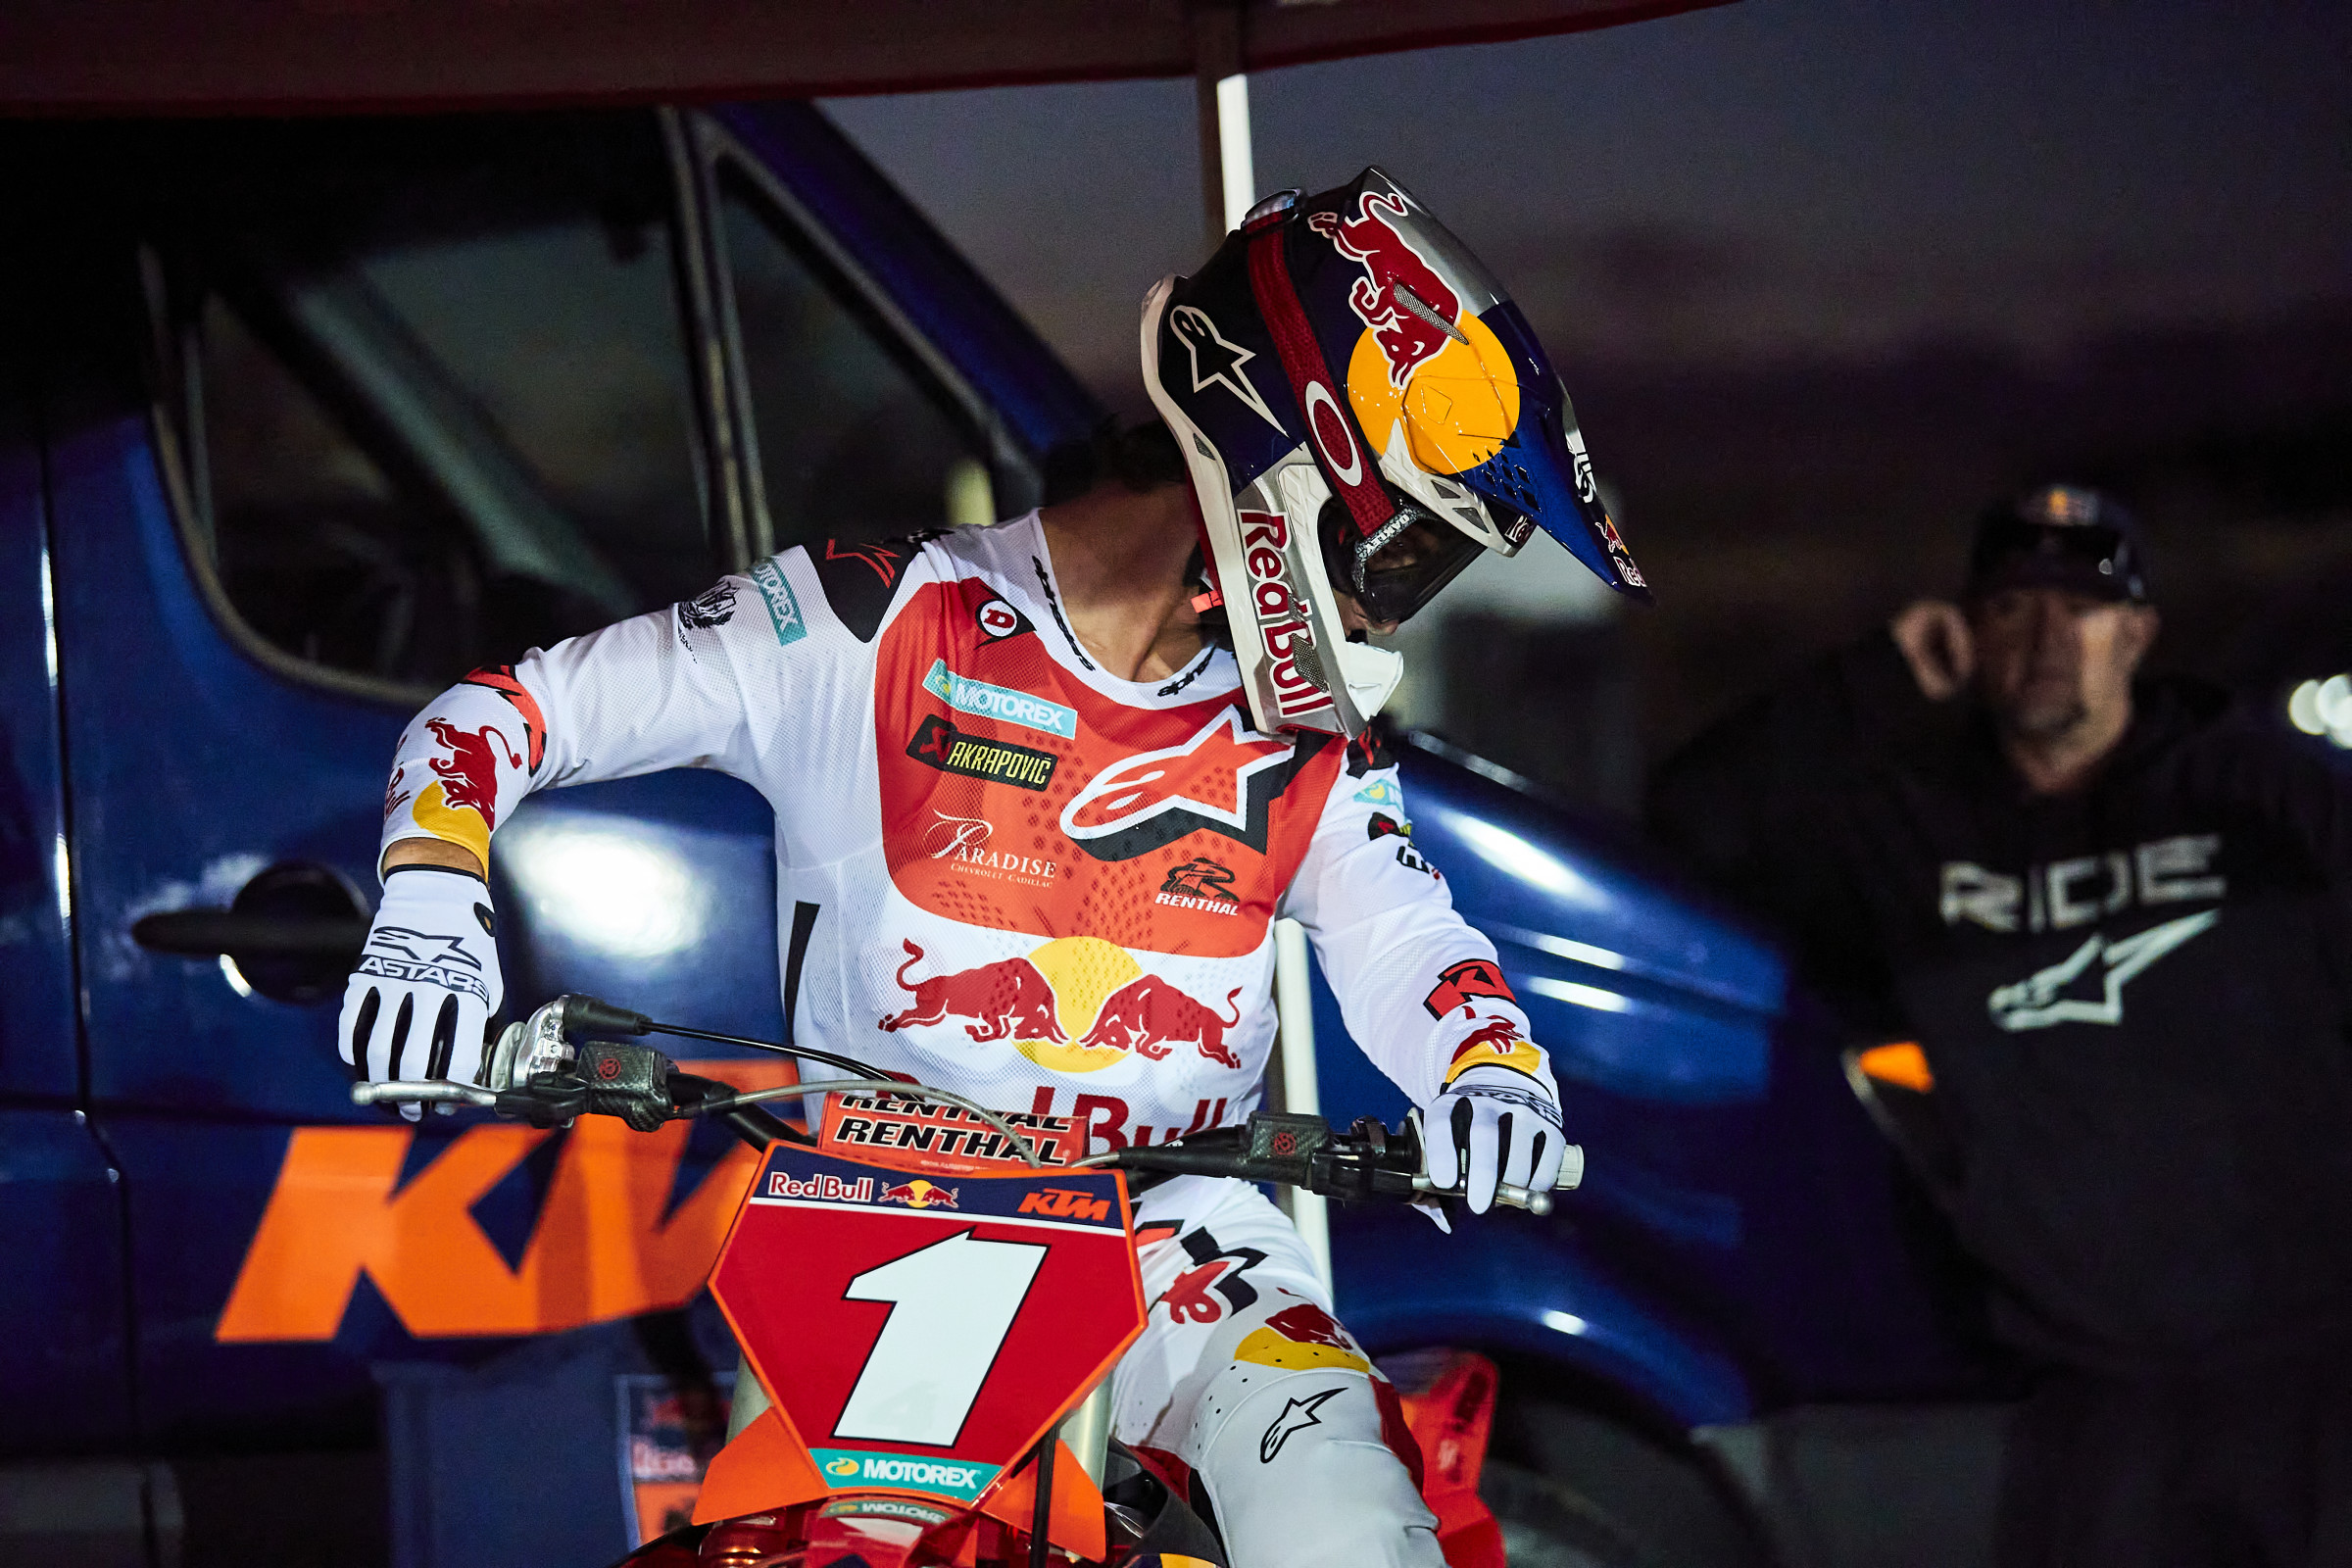 Watch Unyielding Virtues Of A Champion Alpinestars Film On Chase Sexton Racer X